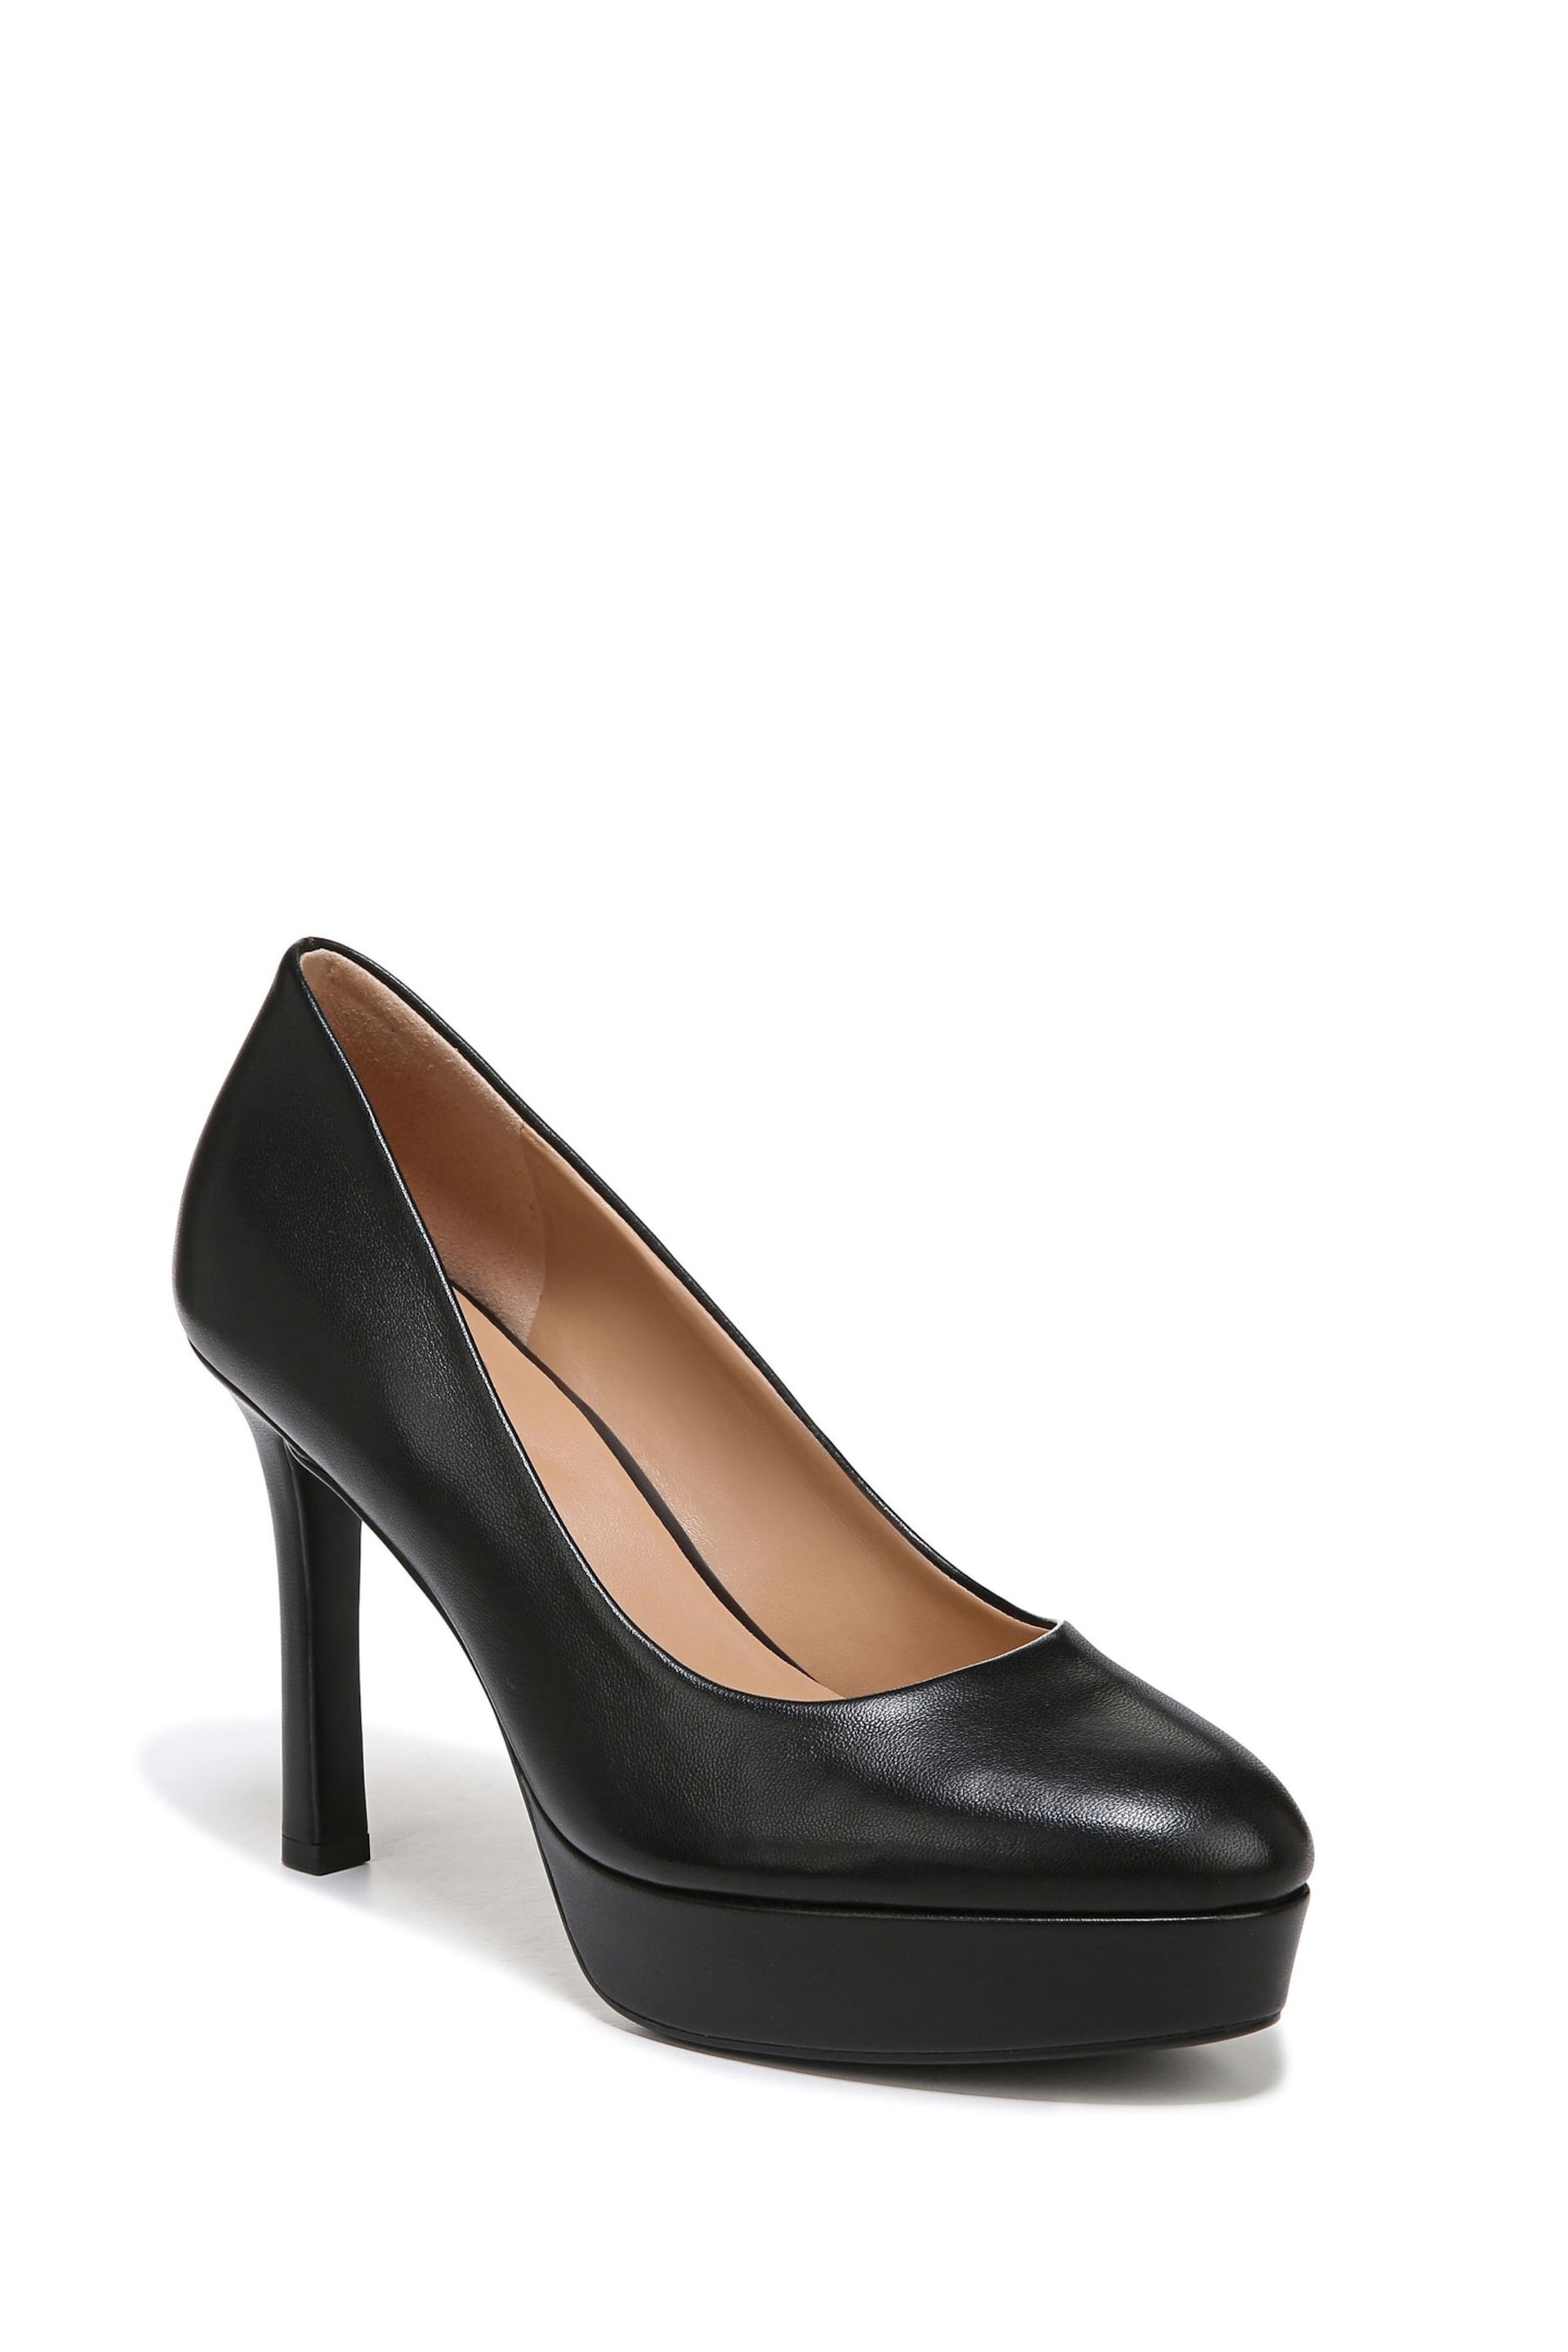 Naturalizer Court Leather Black Shoes - Image 2 of 7